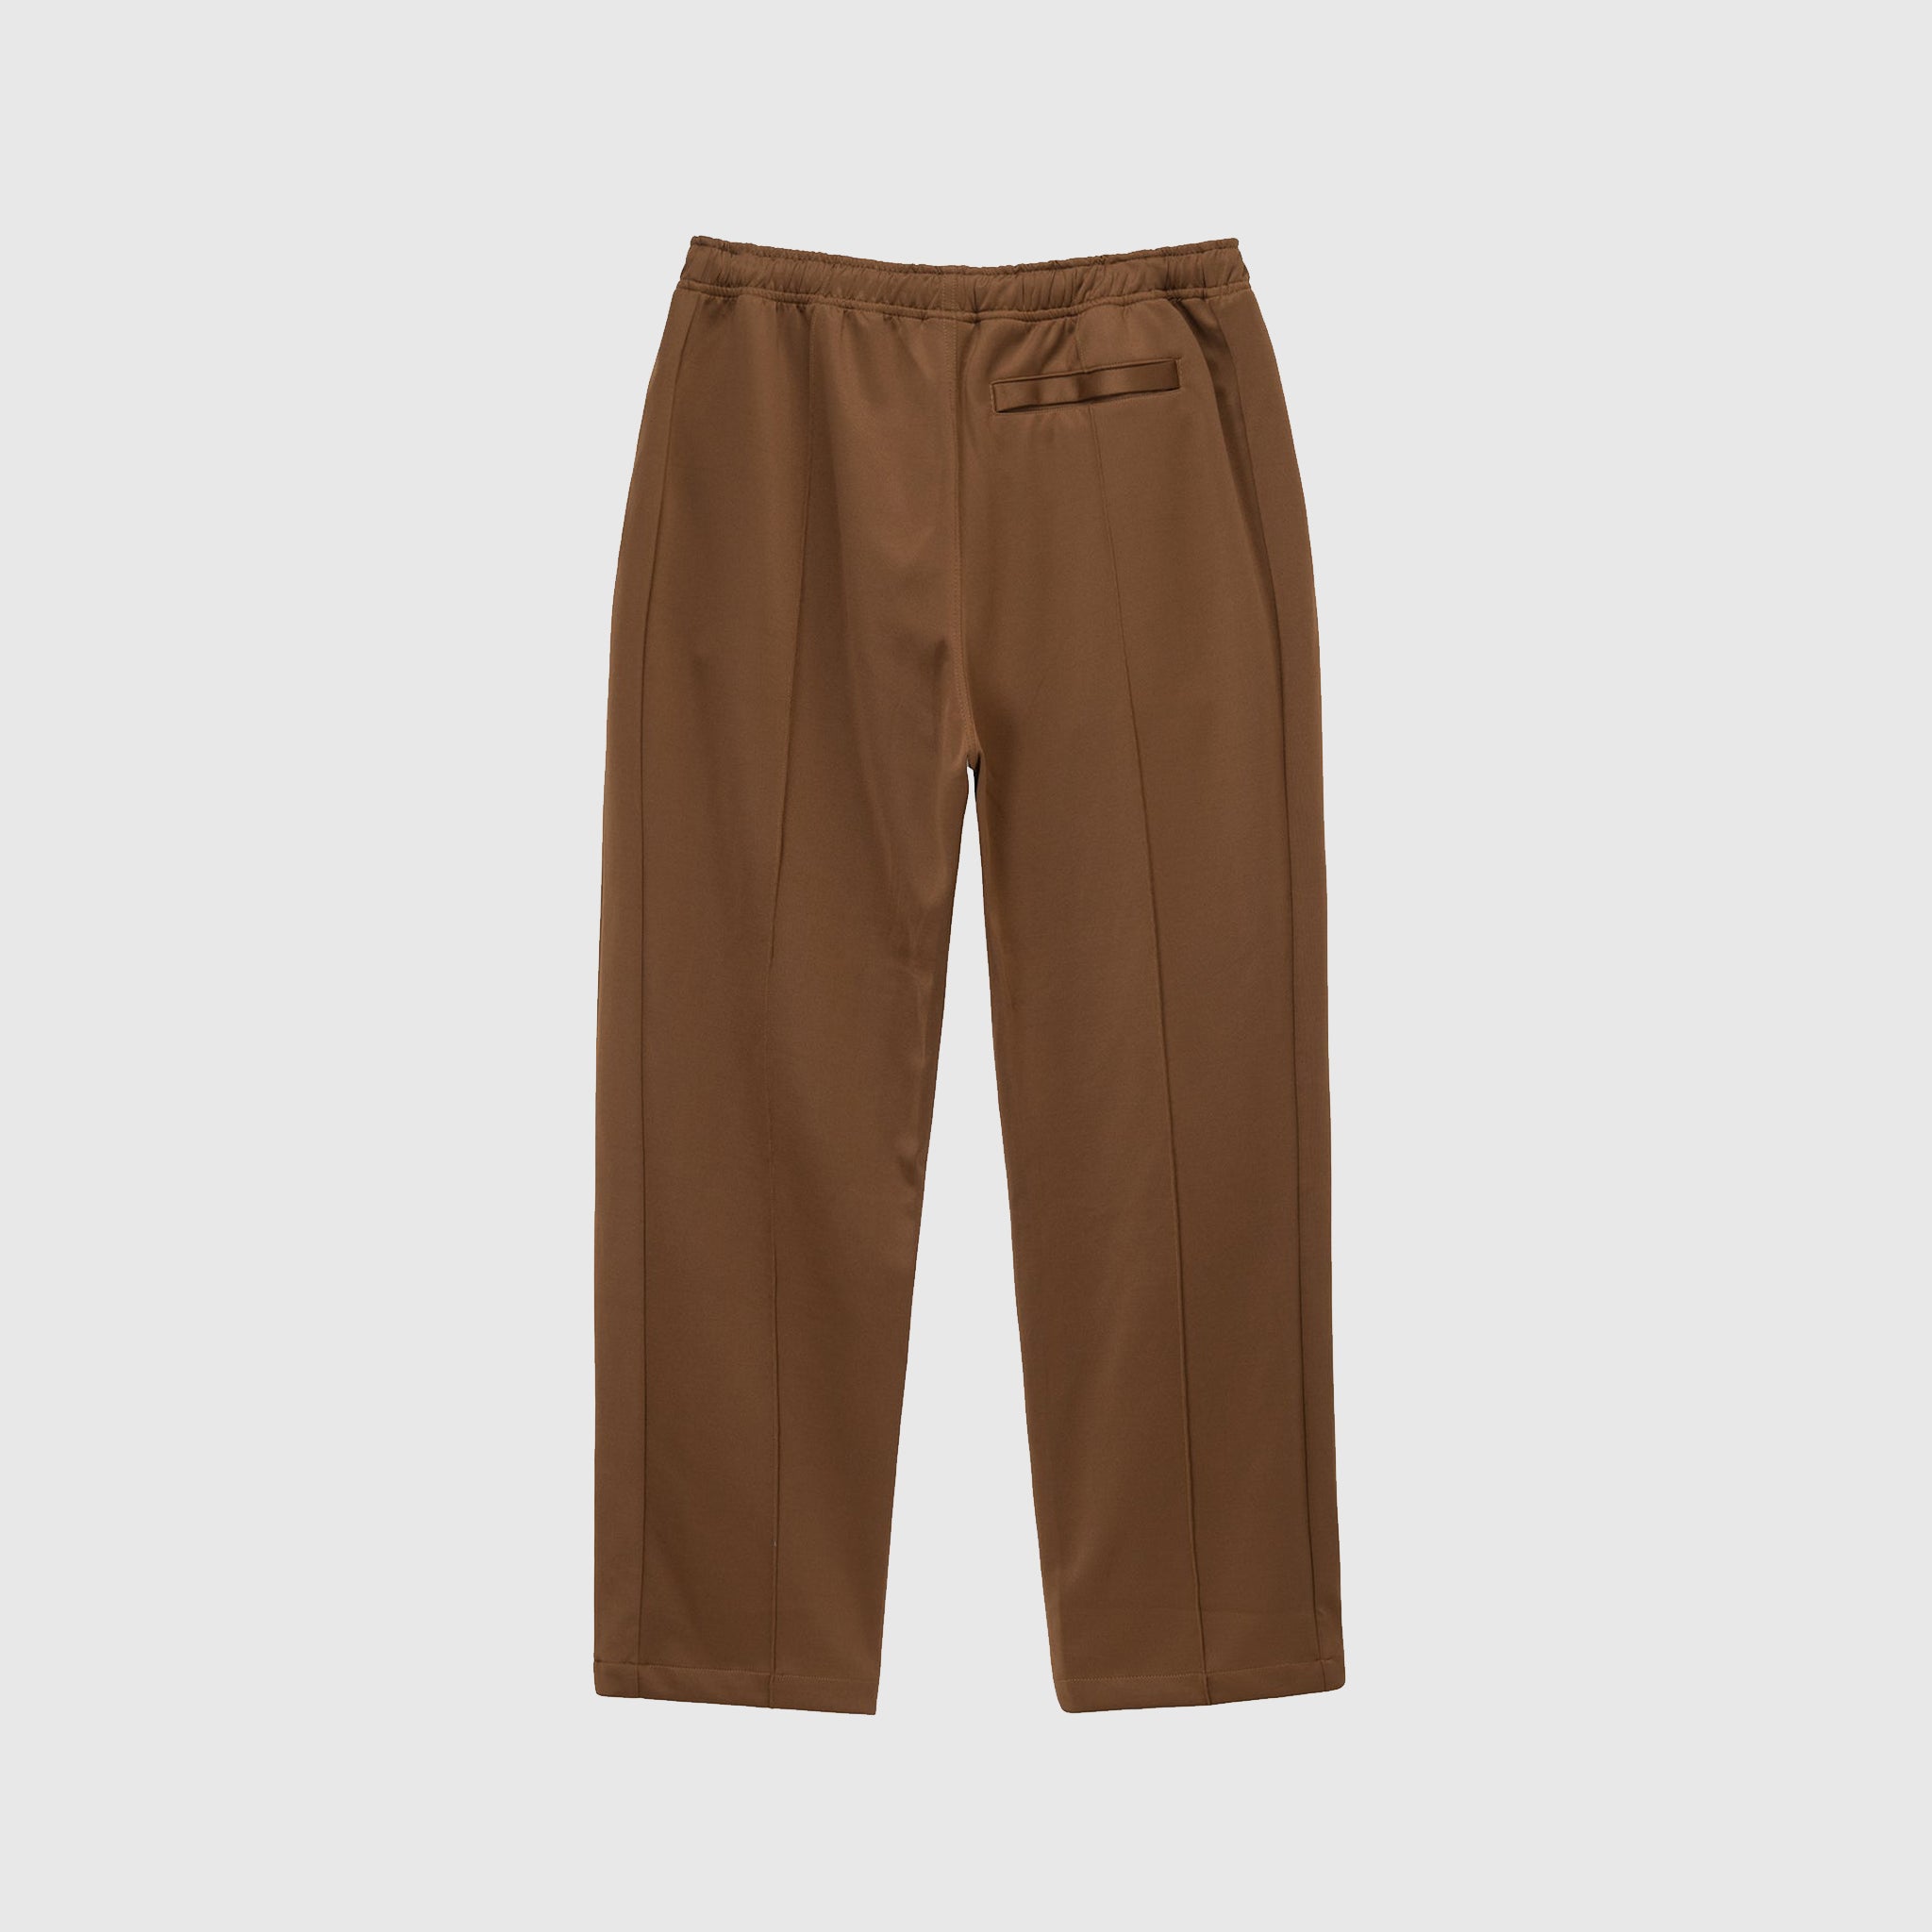 POLY TRACK PANT